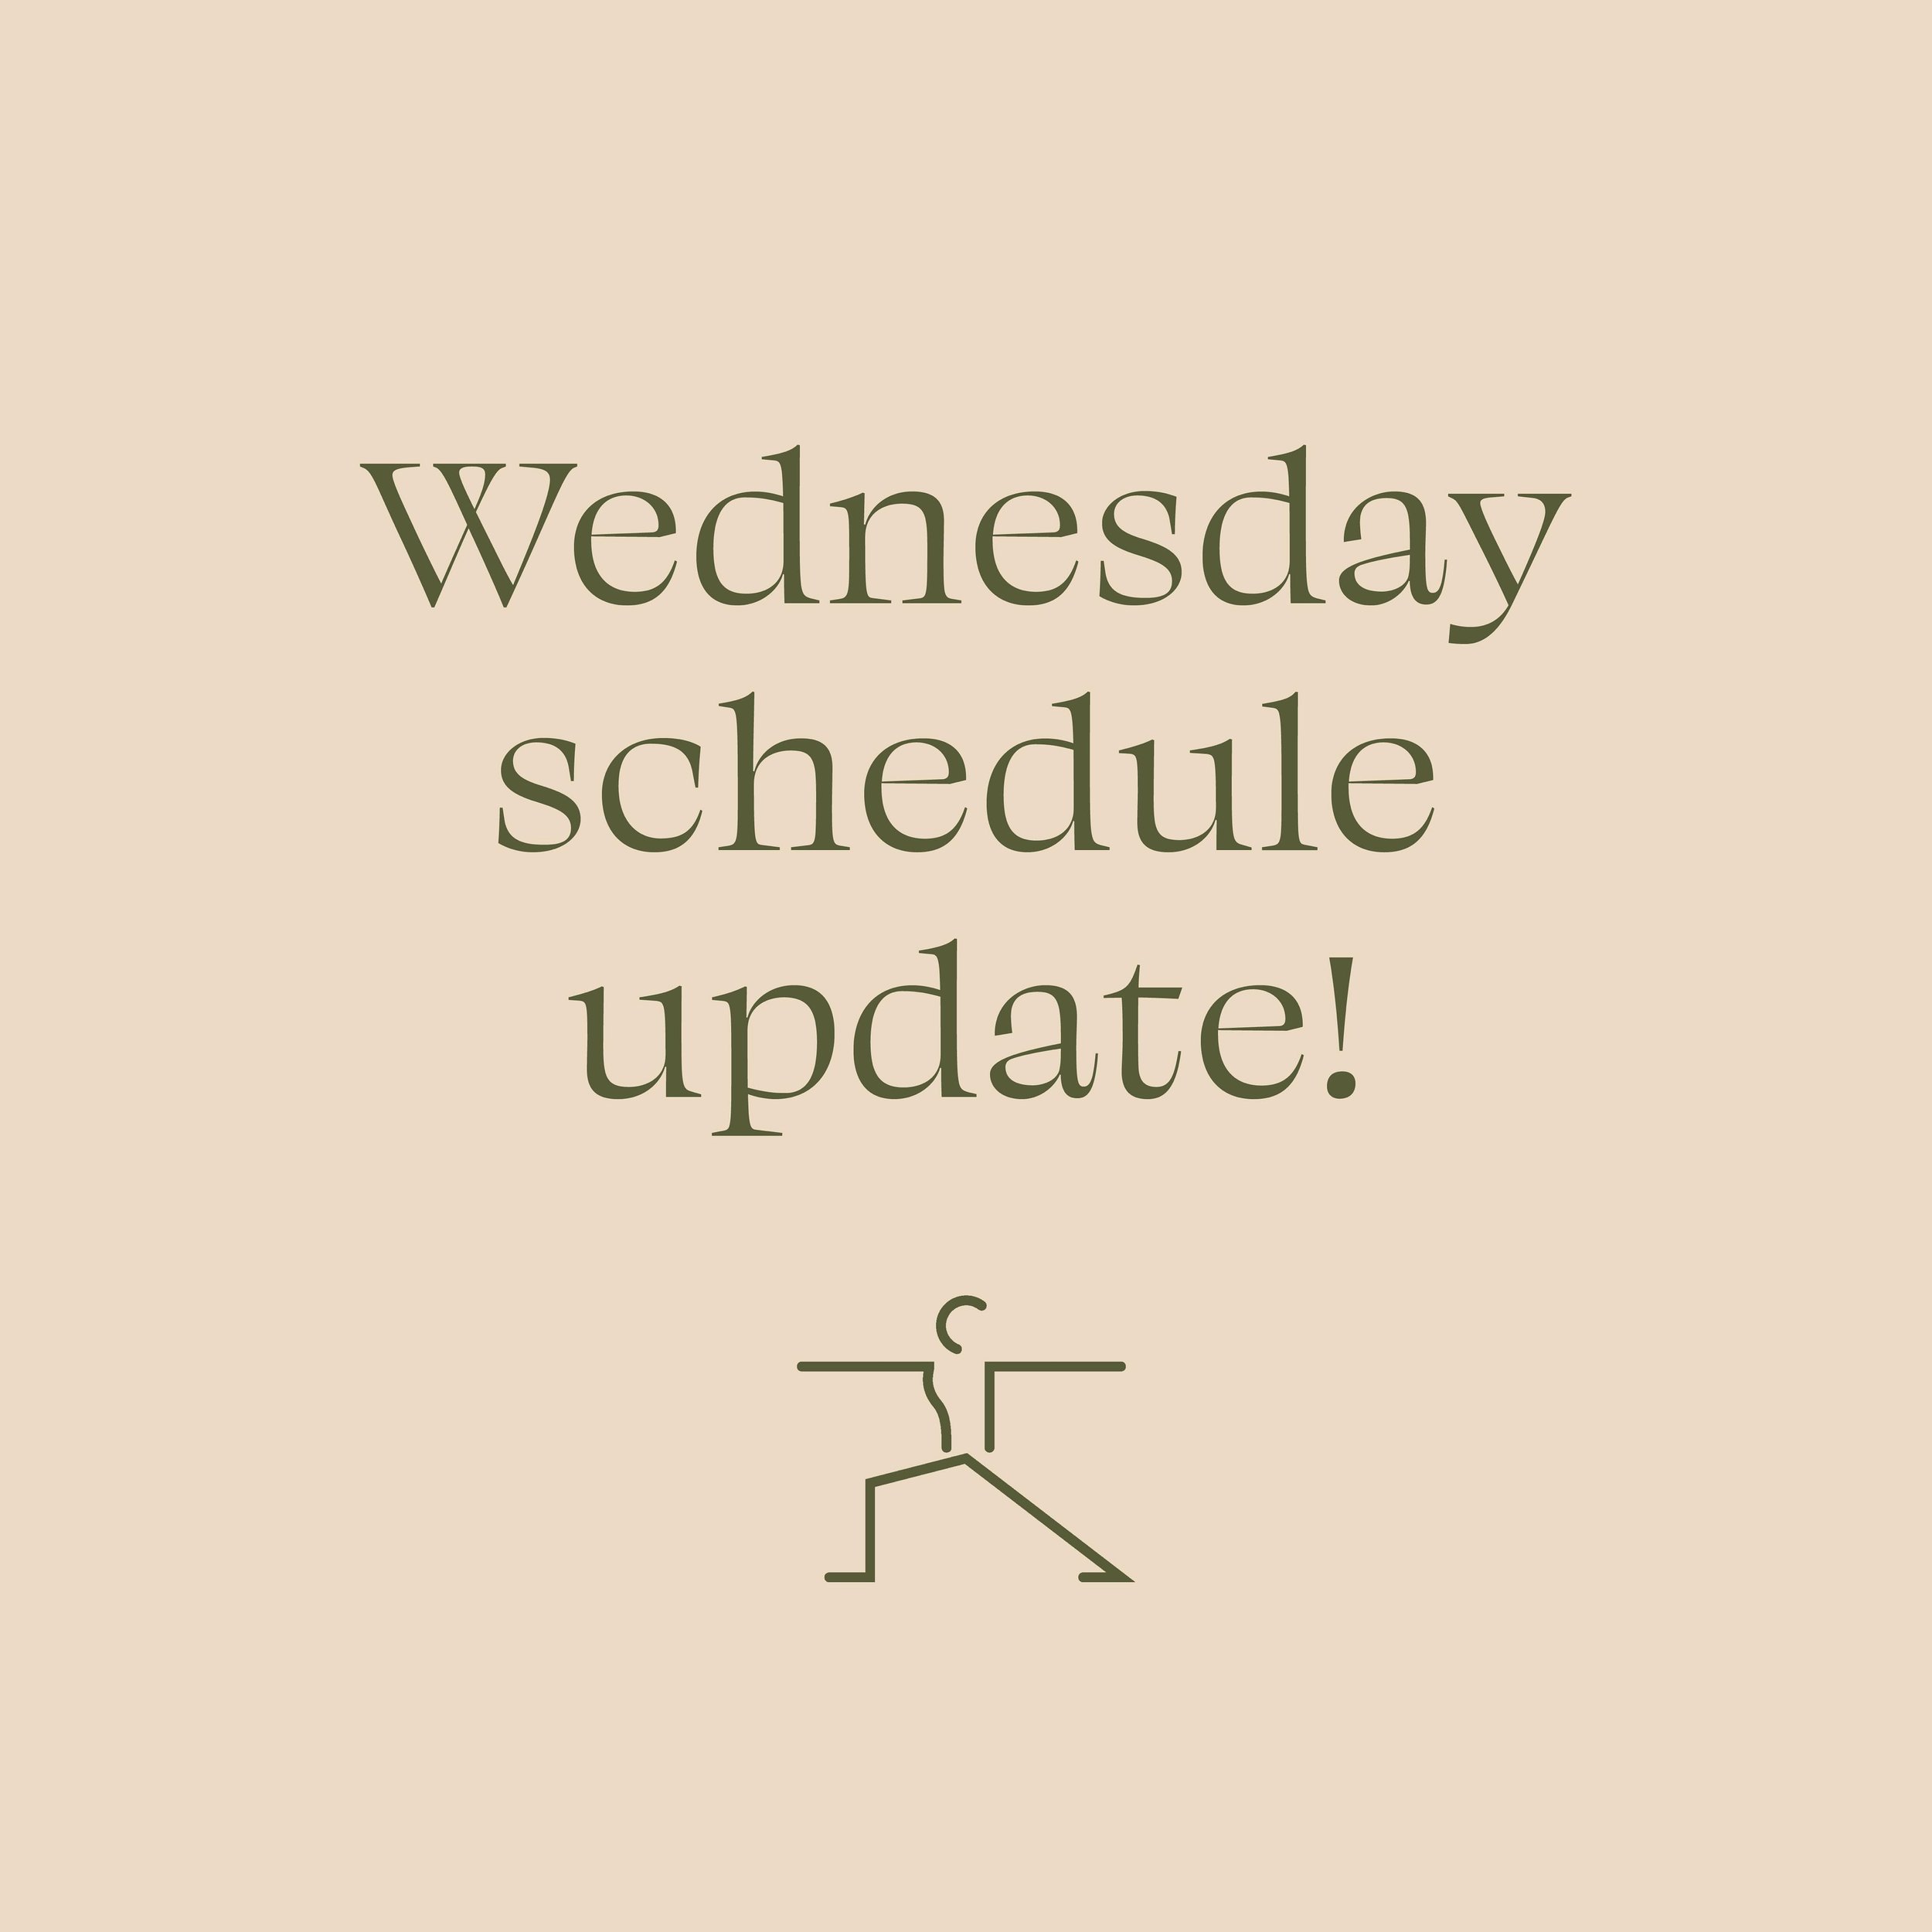 Announcing our new Wednesday line up! 

As of this week, Wednesdays are going to look a little different - the beautiful @moving_with_anya will be kicking off the day with 6:30am vinyasa, and we&rsquo;ve packed in an extra express vinyasa with @ameli